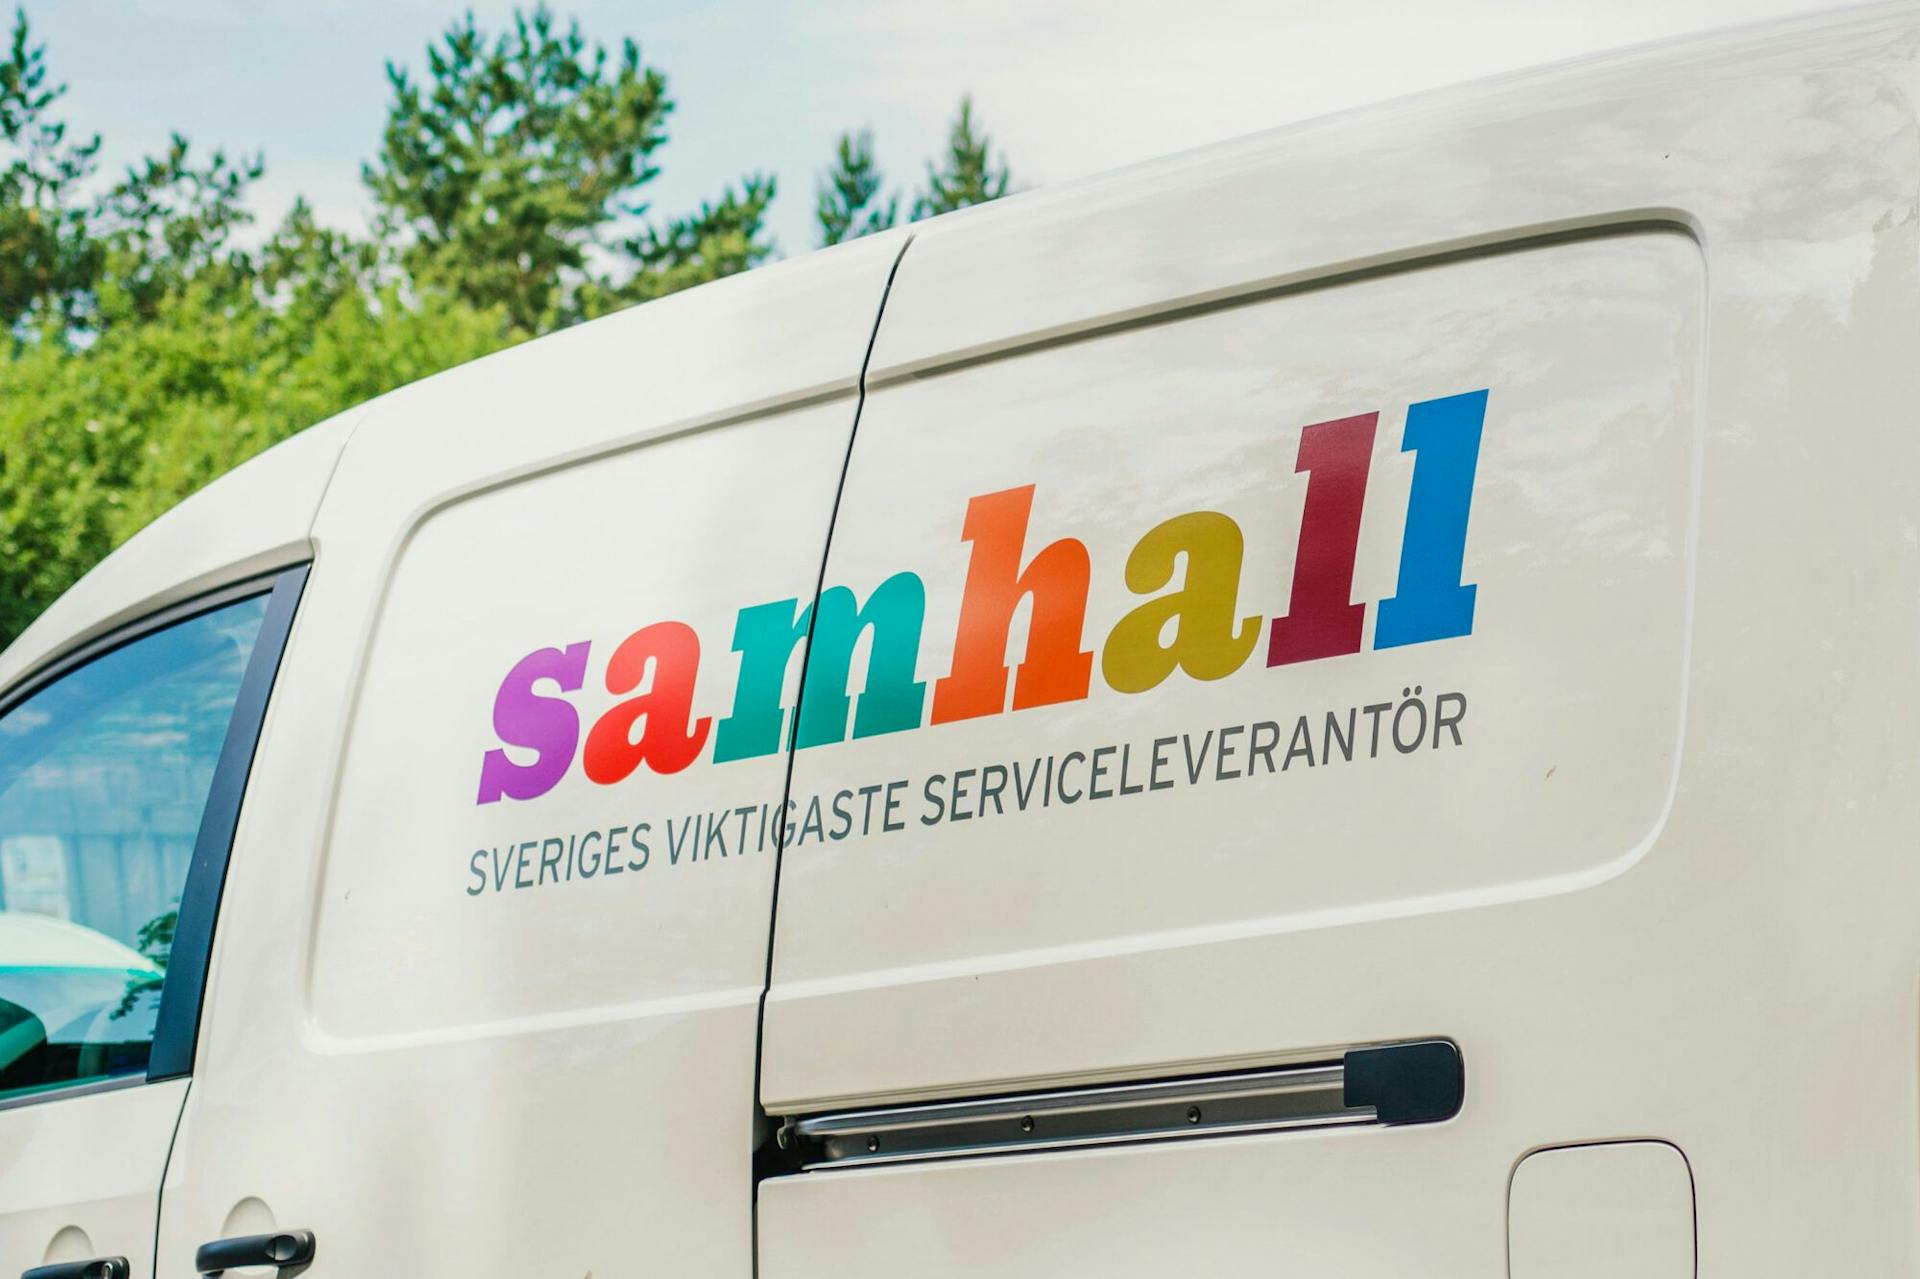 A white pickup truck branded with Samhall's logo.